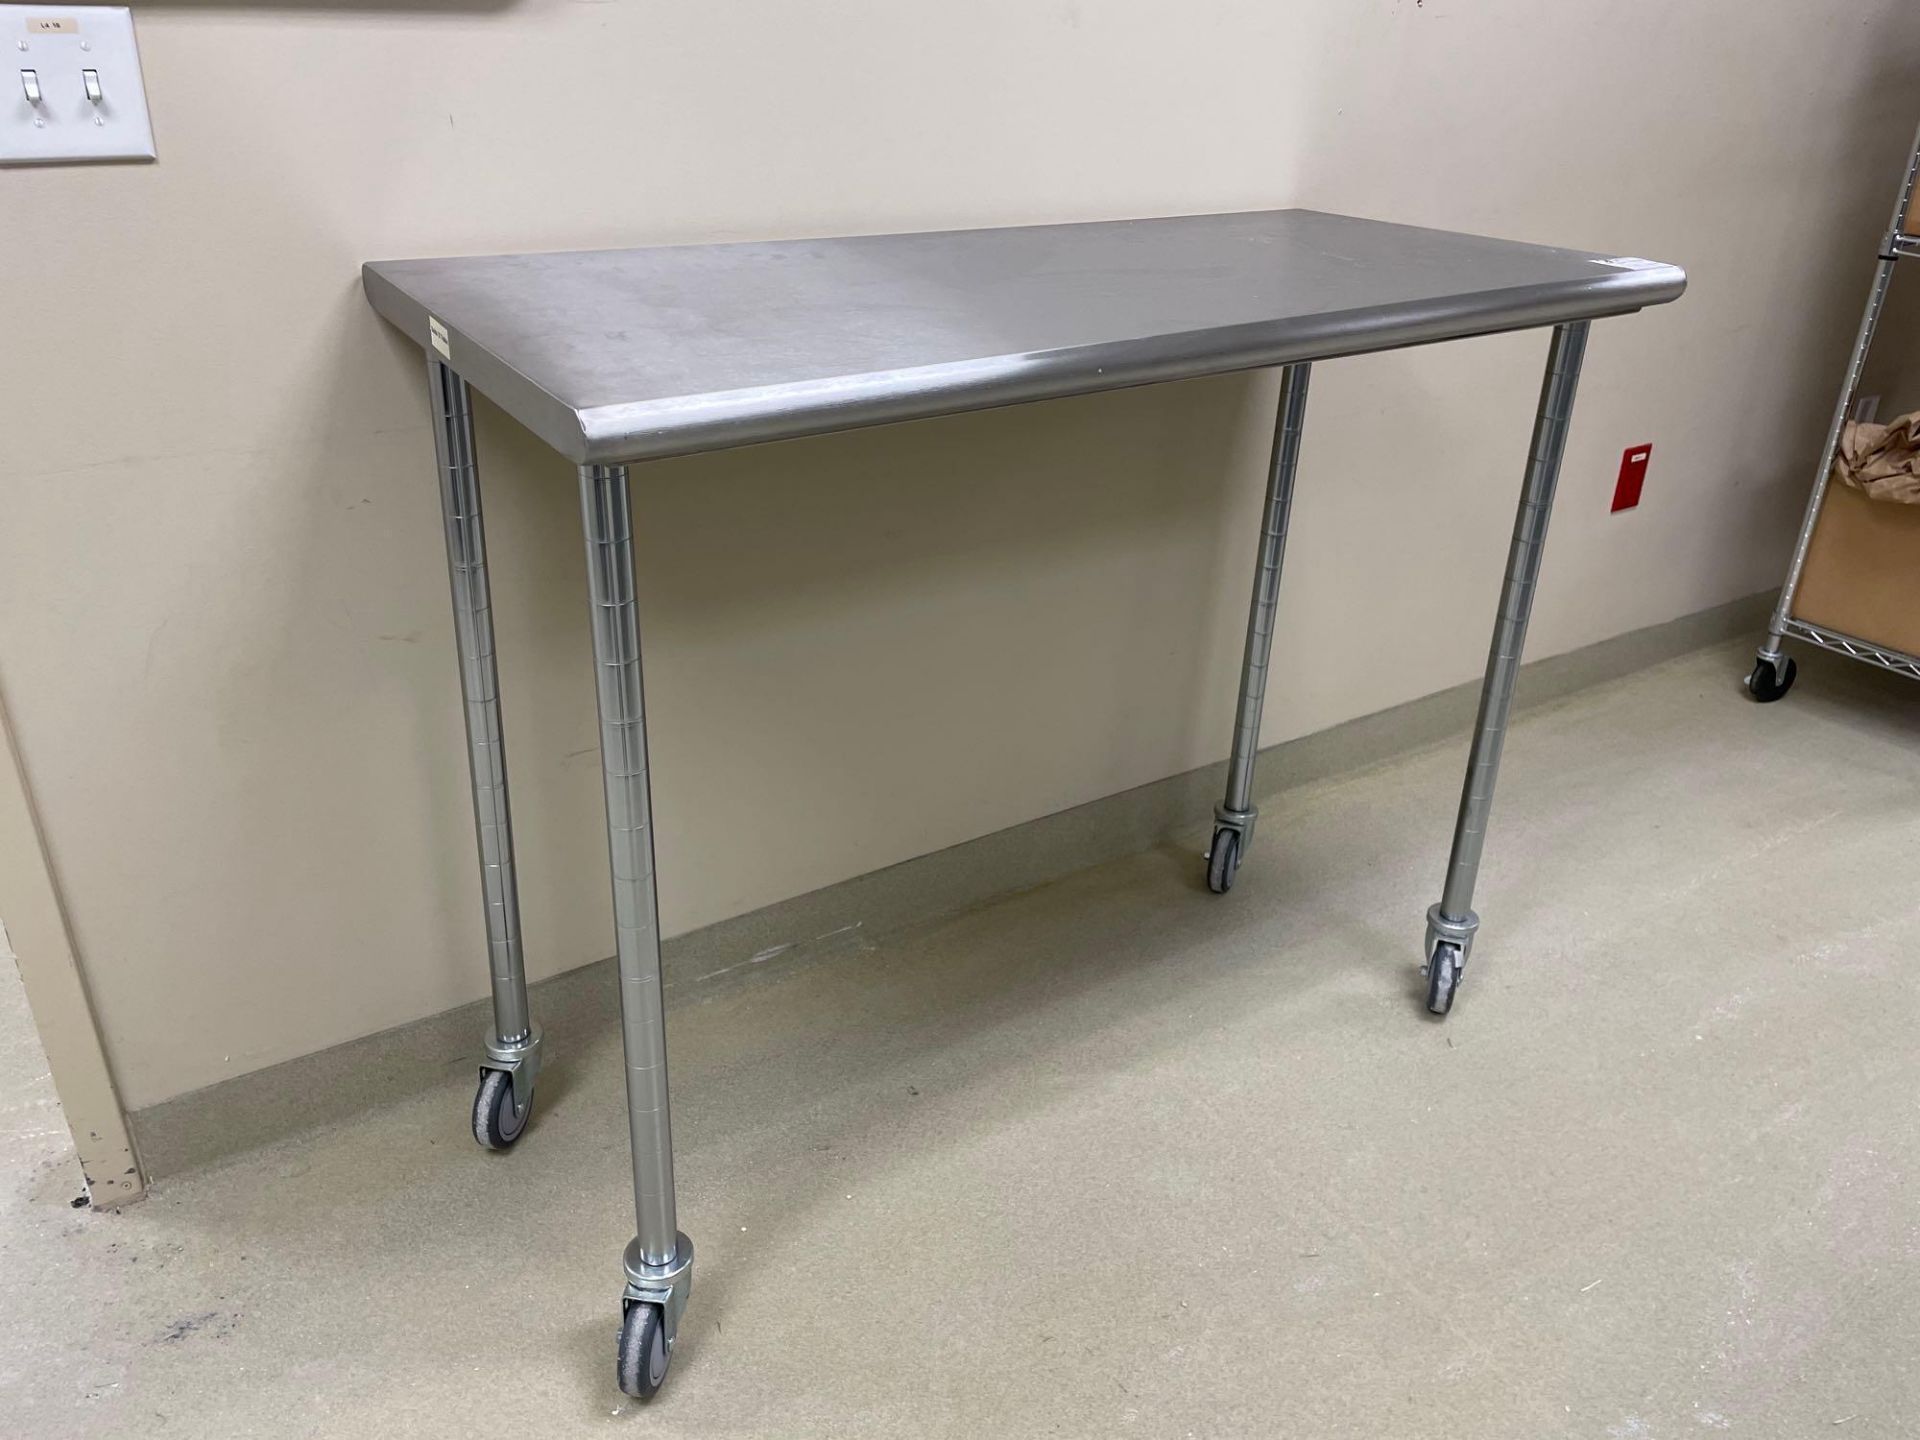 Stainless Top Table w/ Wire Shelf Legs on Casters